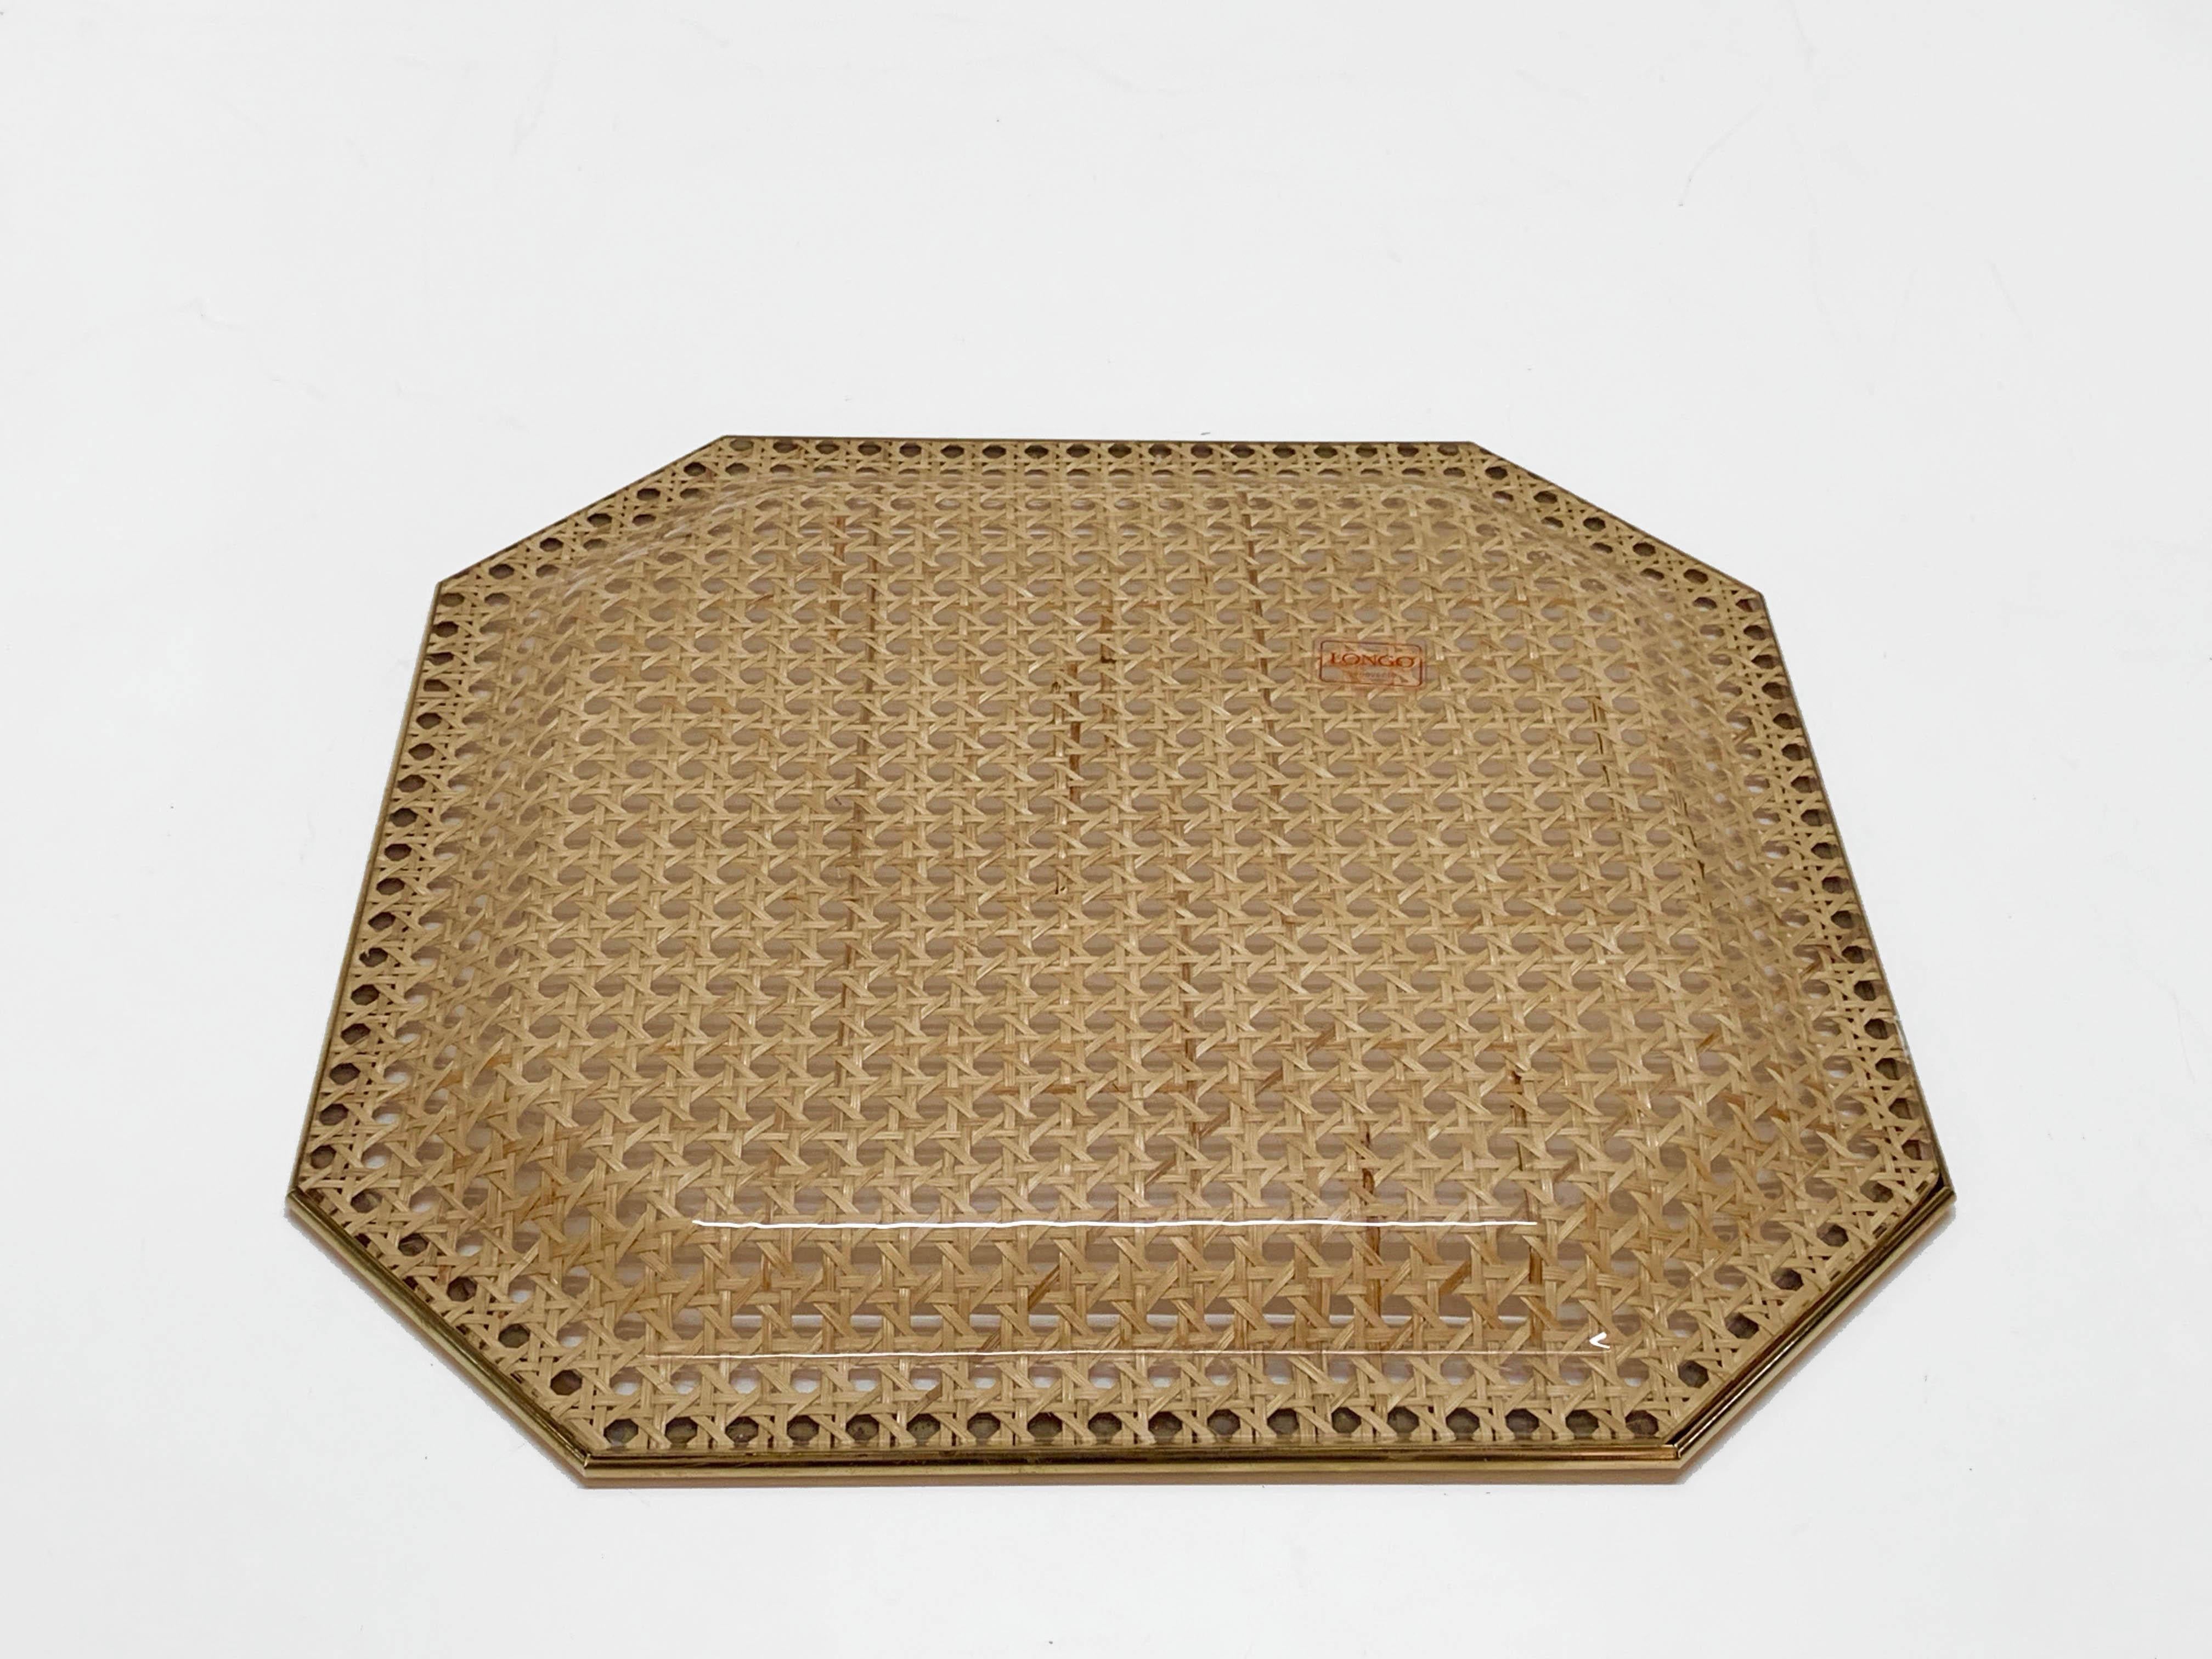 Midcentury octagonal serving tray in Lucite wicker and brass. It was designed in France during the 1970s in the style of Christian Dior.

This large and elegant midcentury serving tray consists of a large Lucite base nestled with brass